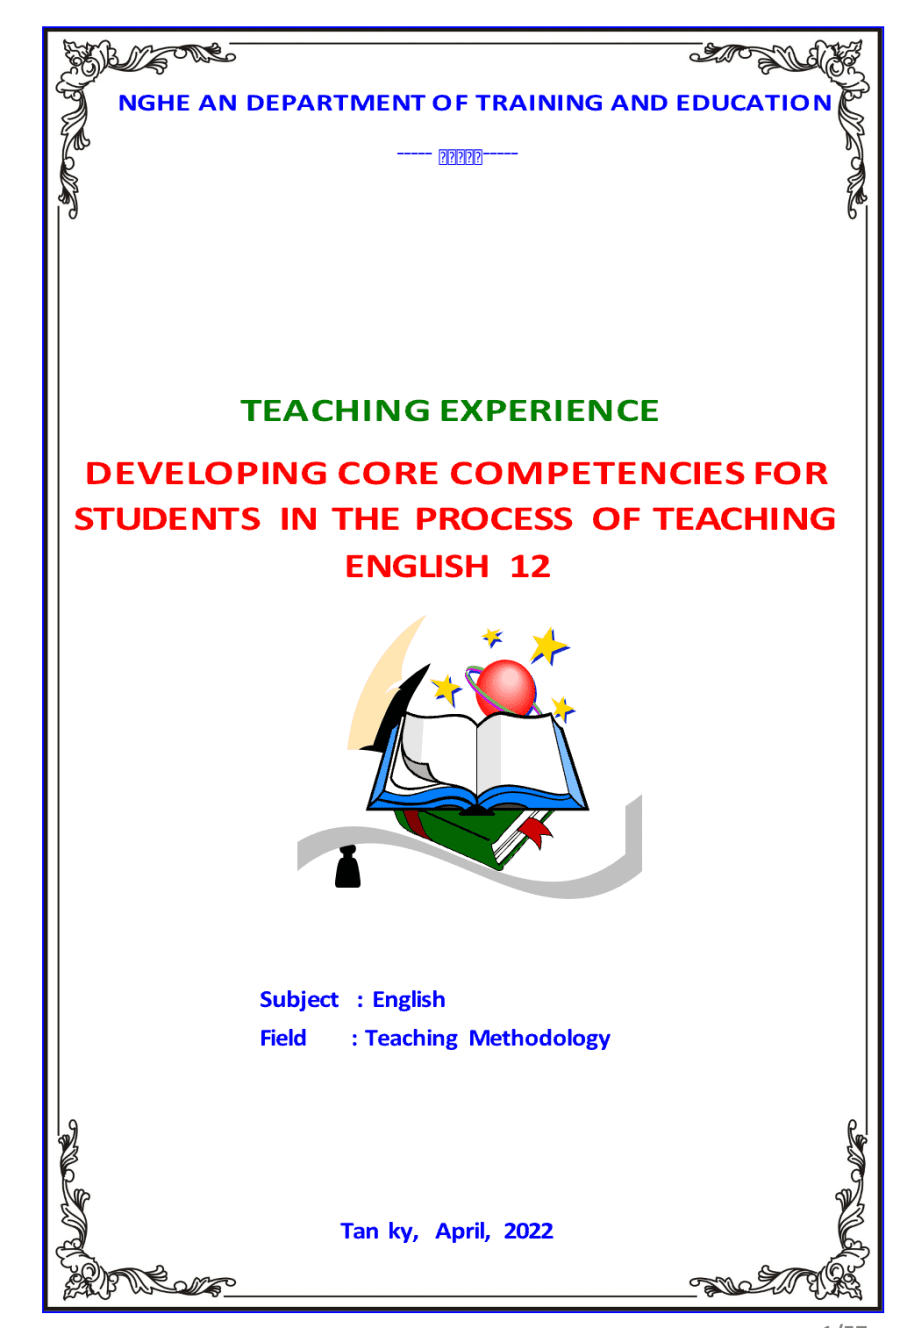 SKKN Developing core competencies for students in the process of teaching English 12